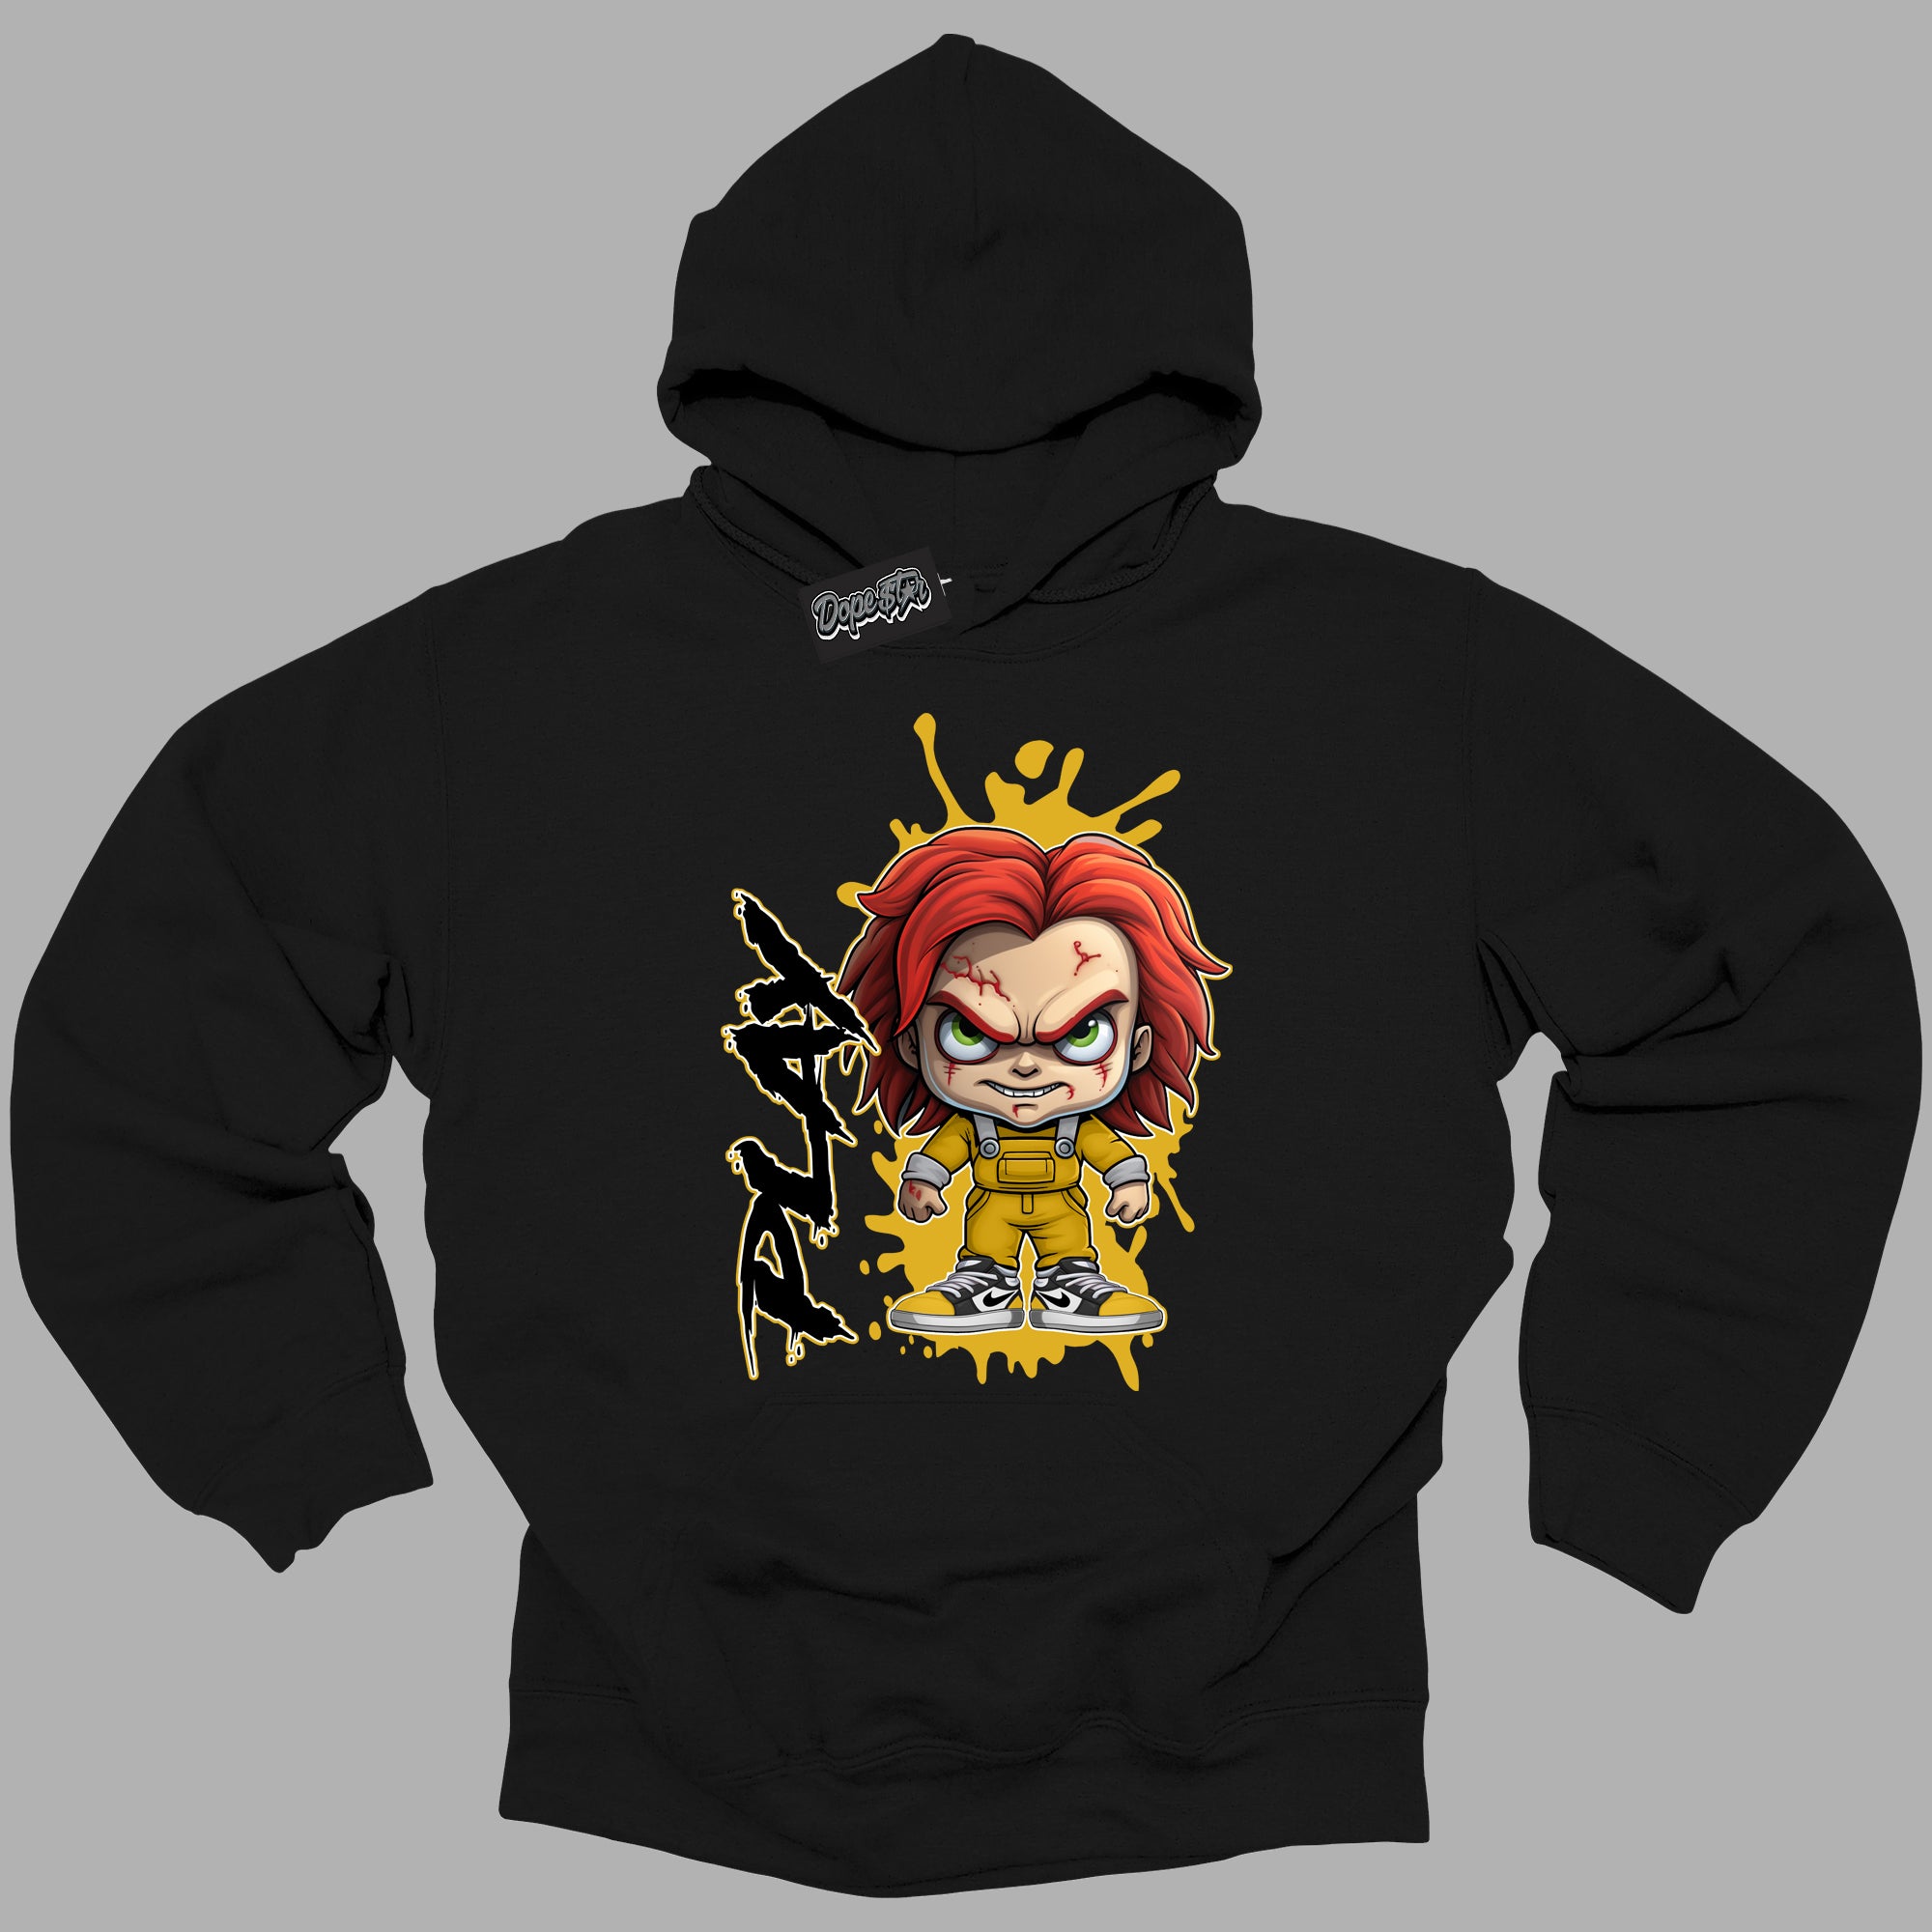 Cool Black Hoodie with “ Play ”  design that Perfectly Matches Yellow Ochre 6s Sneakers.